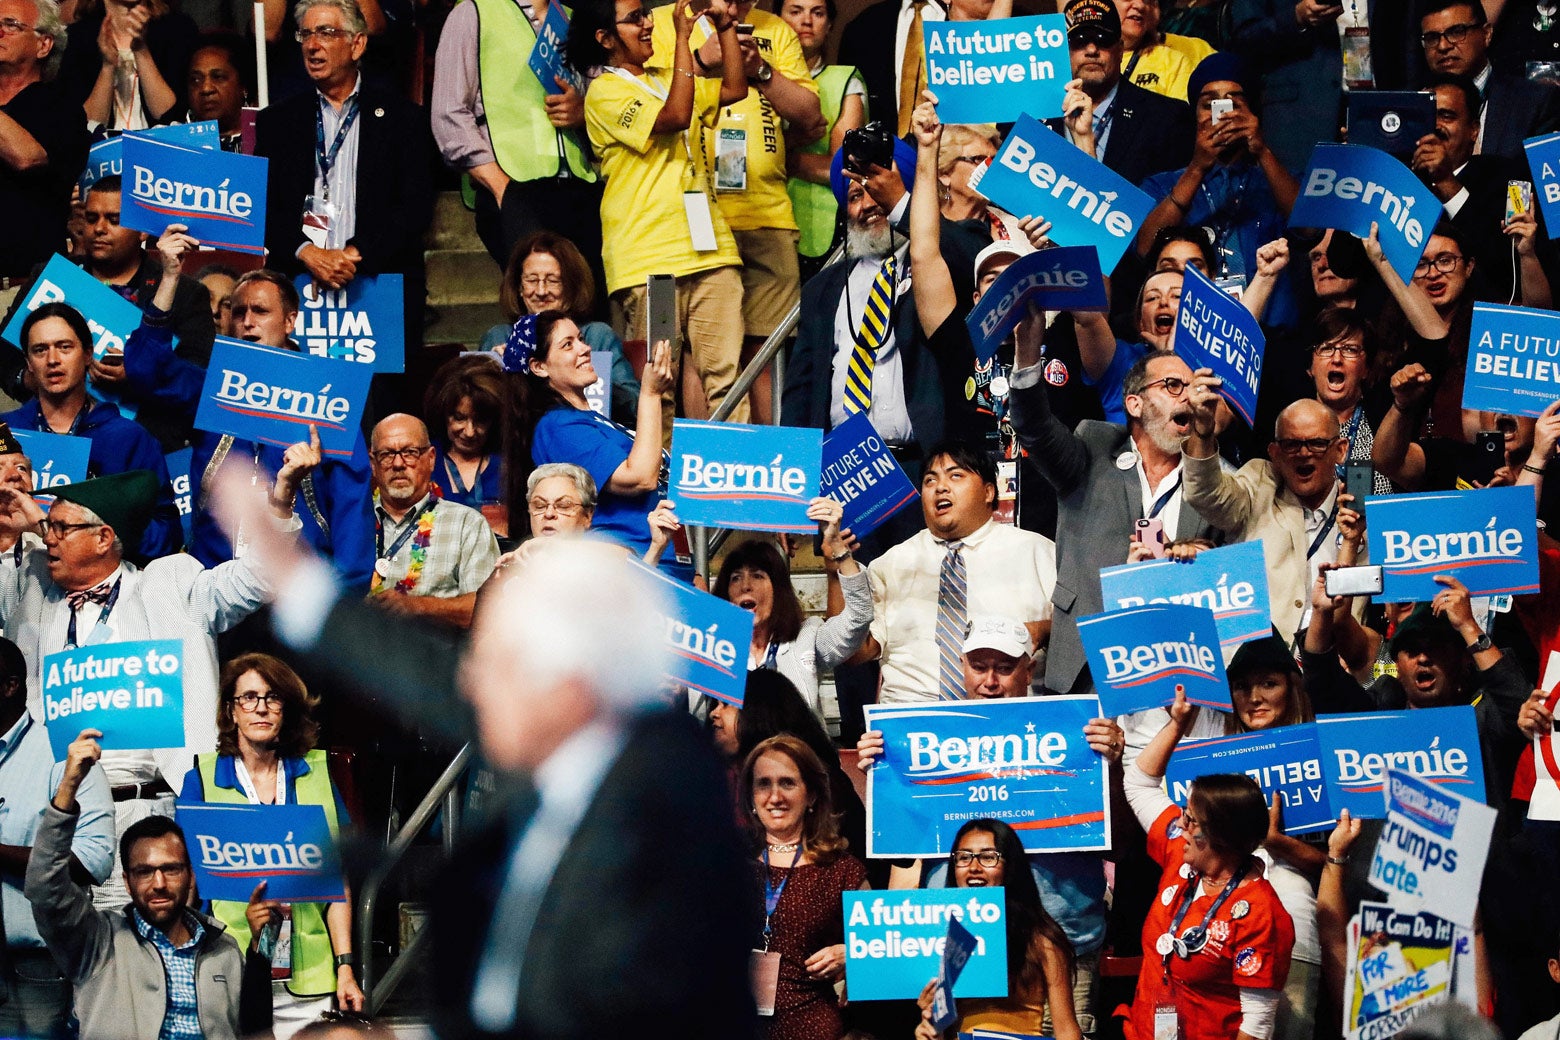 Supporters of Sen. Bernie Sanders stand and cheer as he delivers remarks.